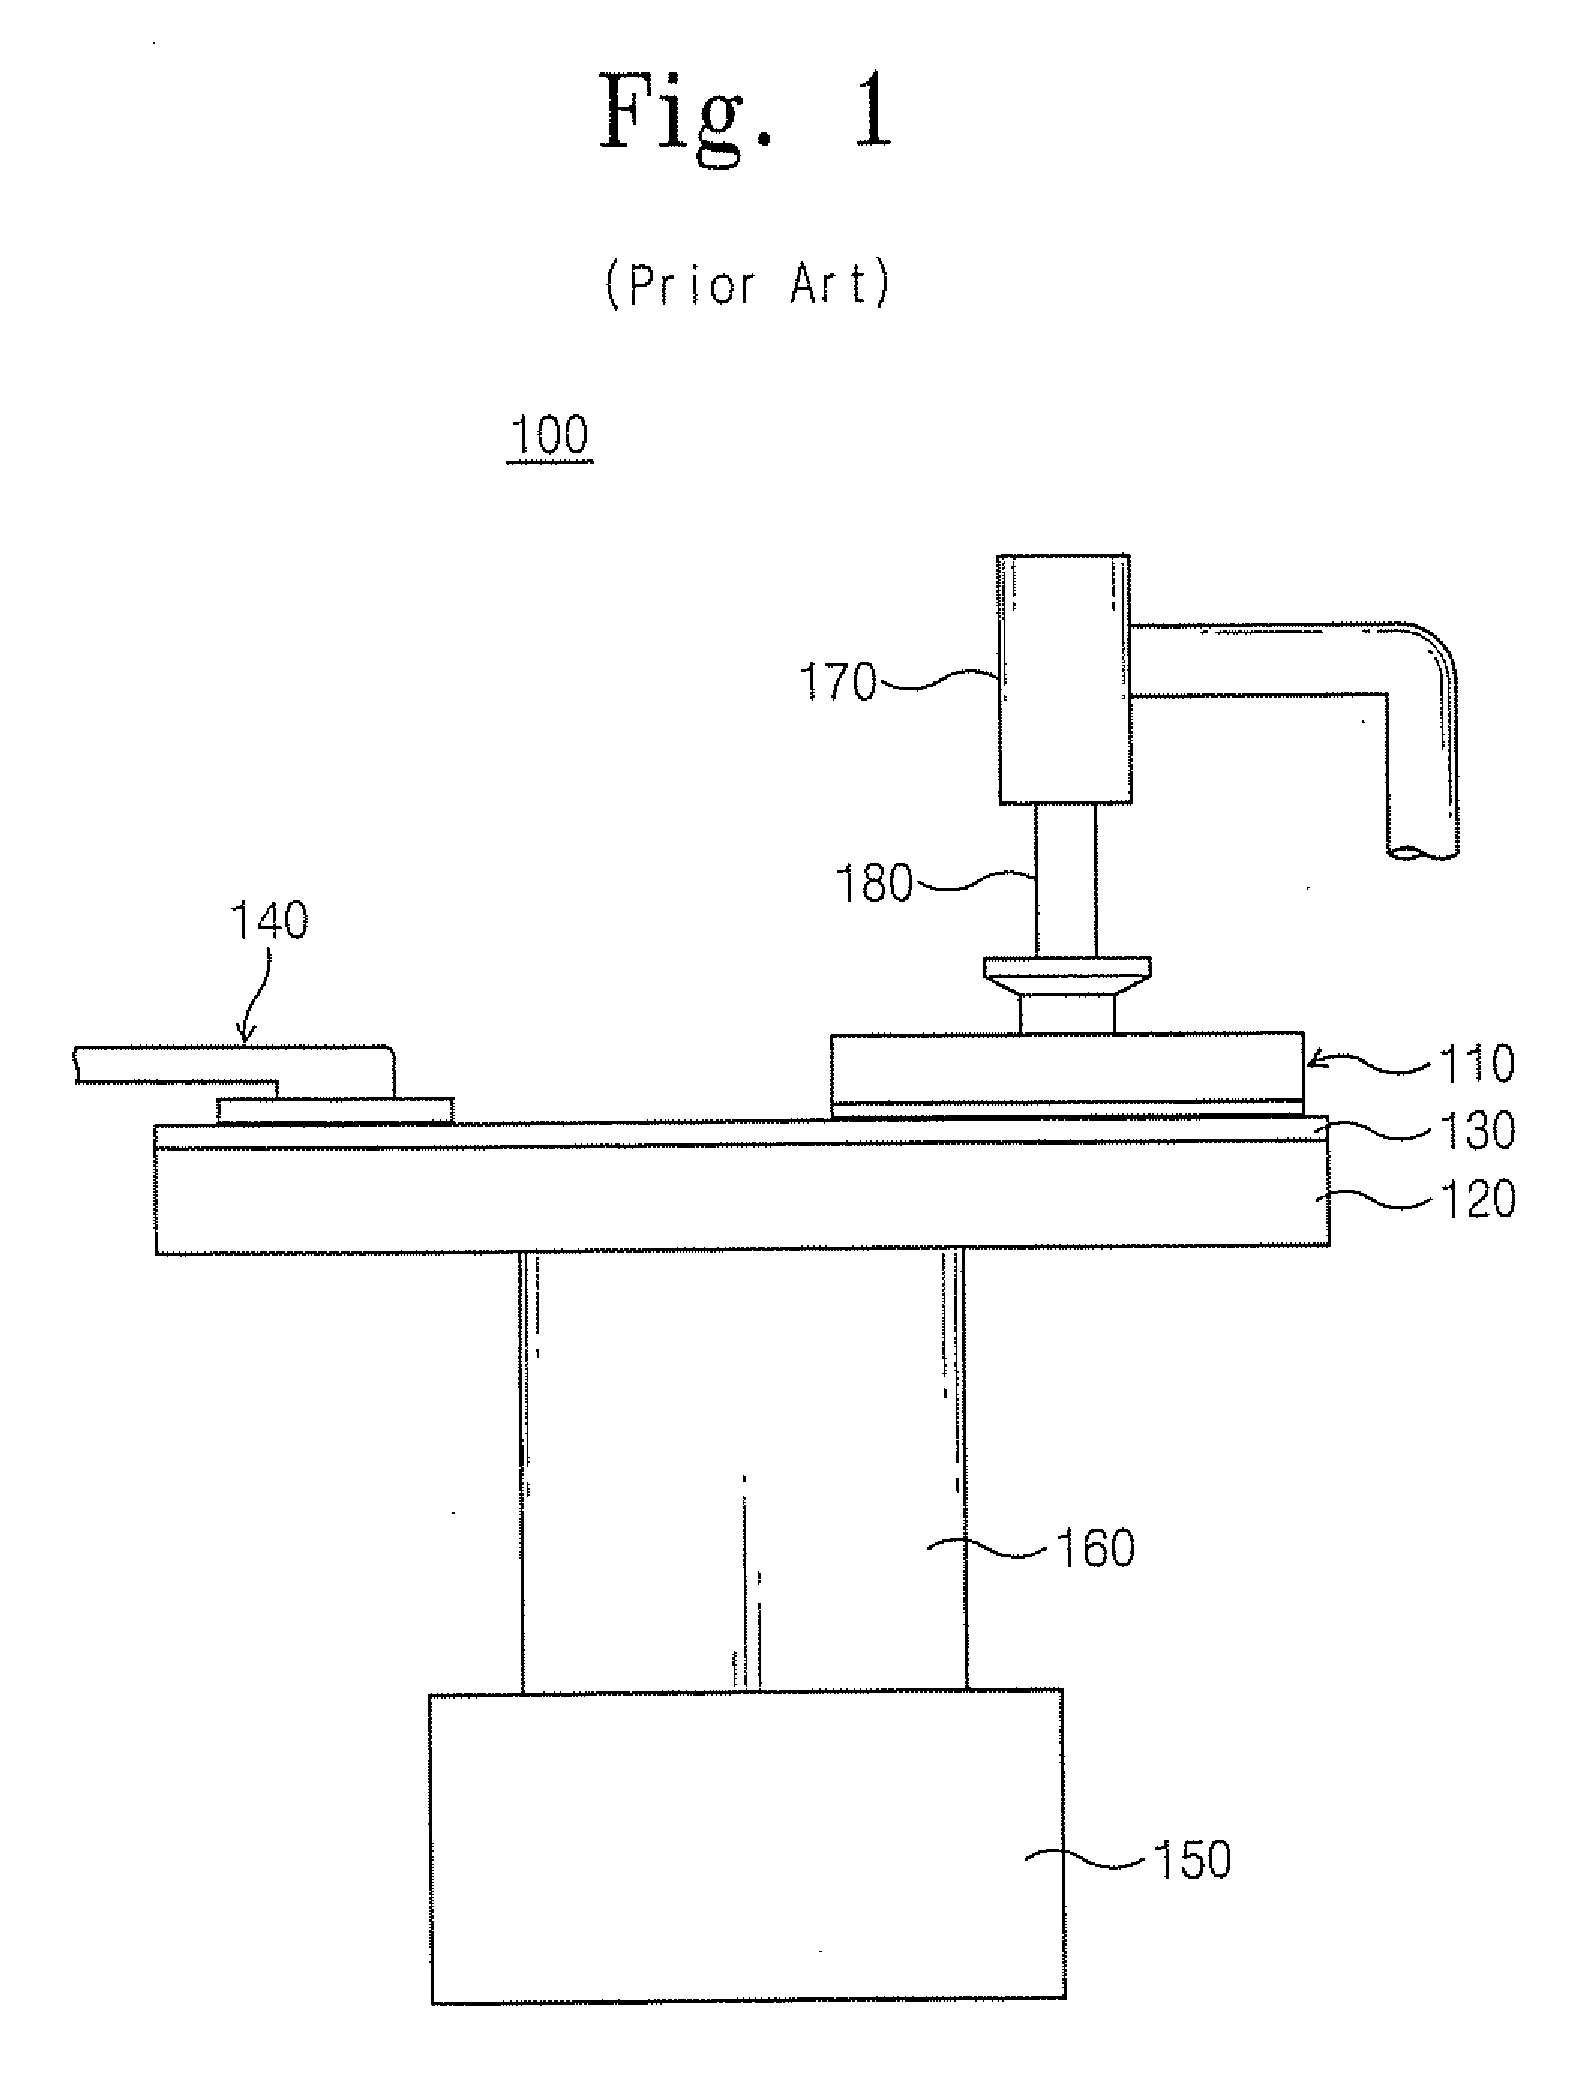 Chemical Mechanical Polishing Apparatus and Methods Using a Polishing Surface with Non-Uniform Rigidity